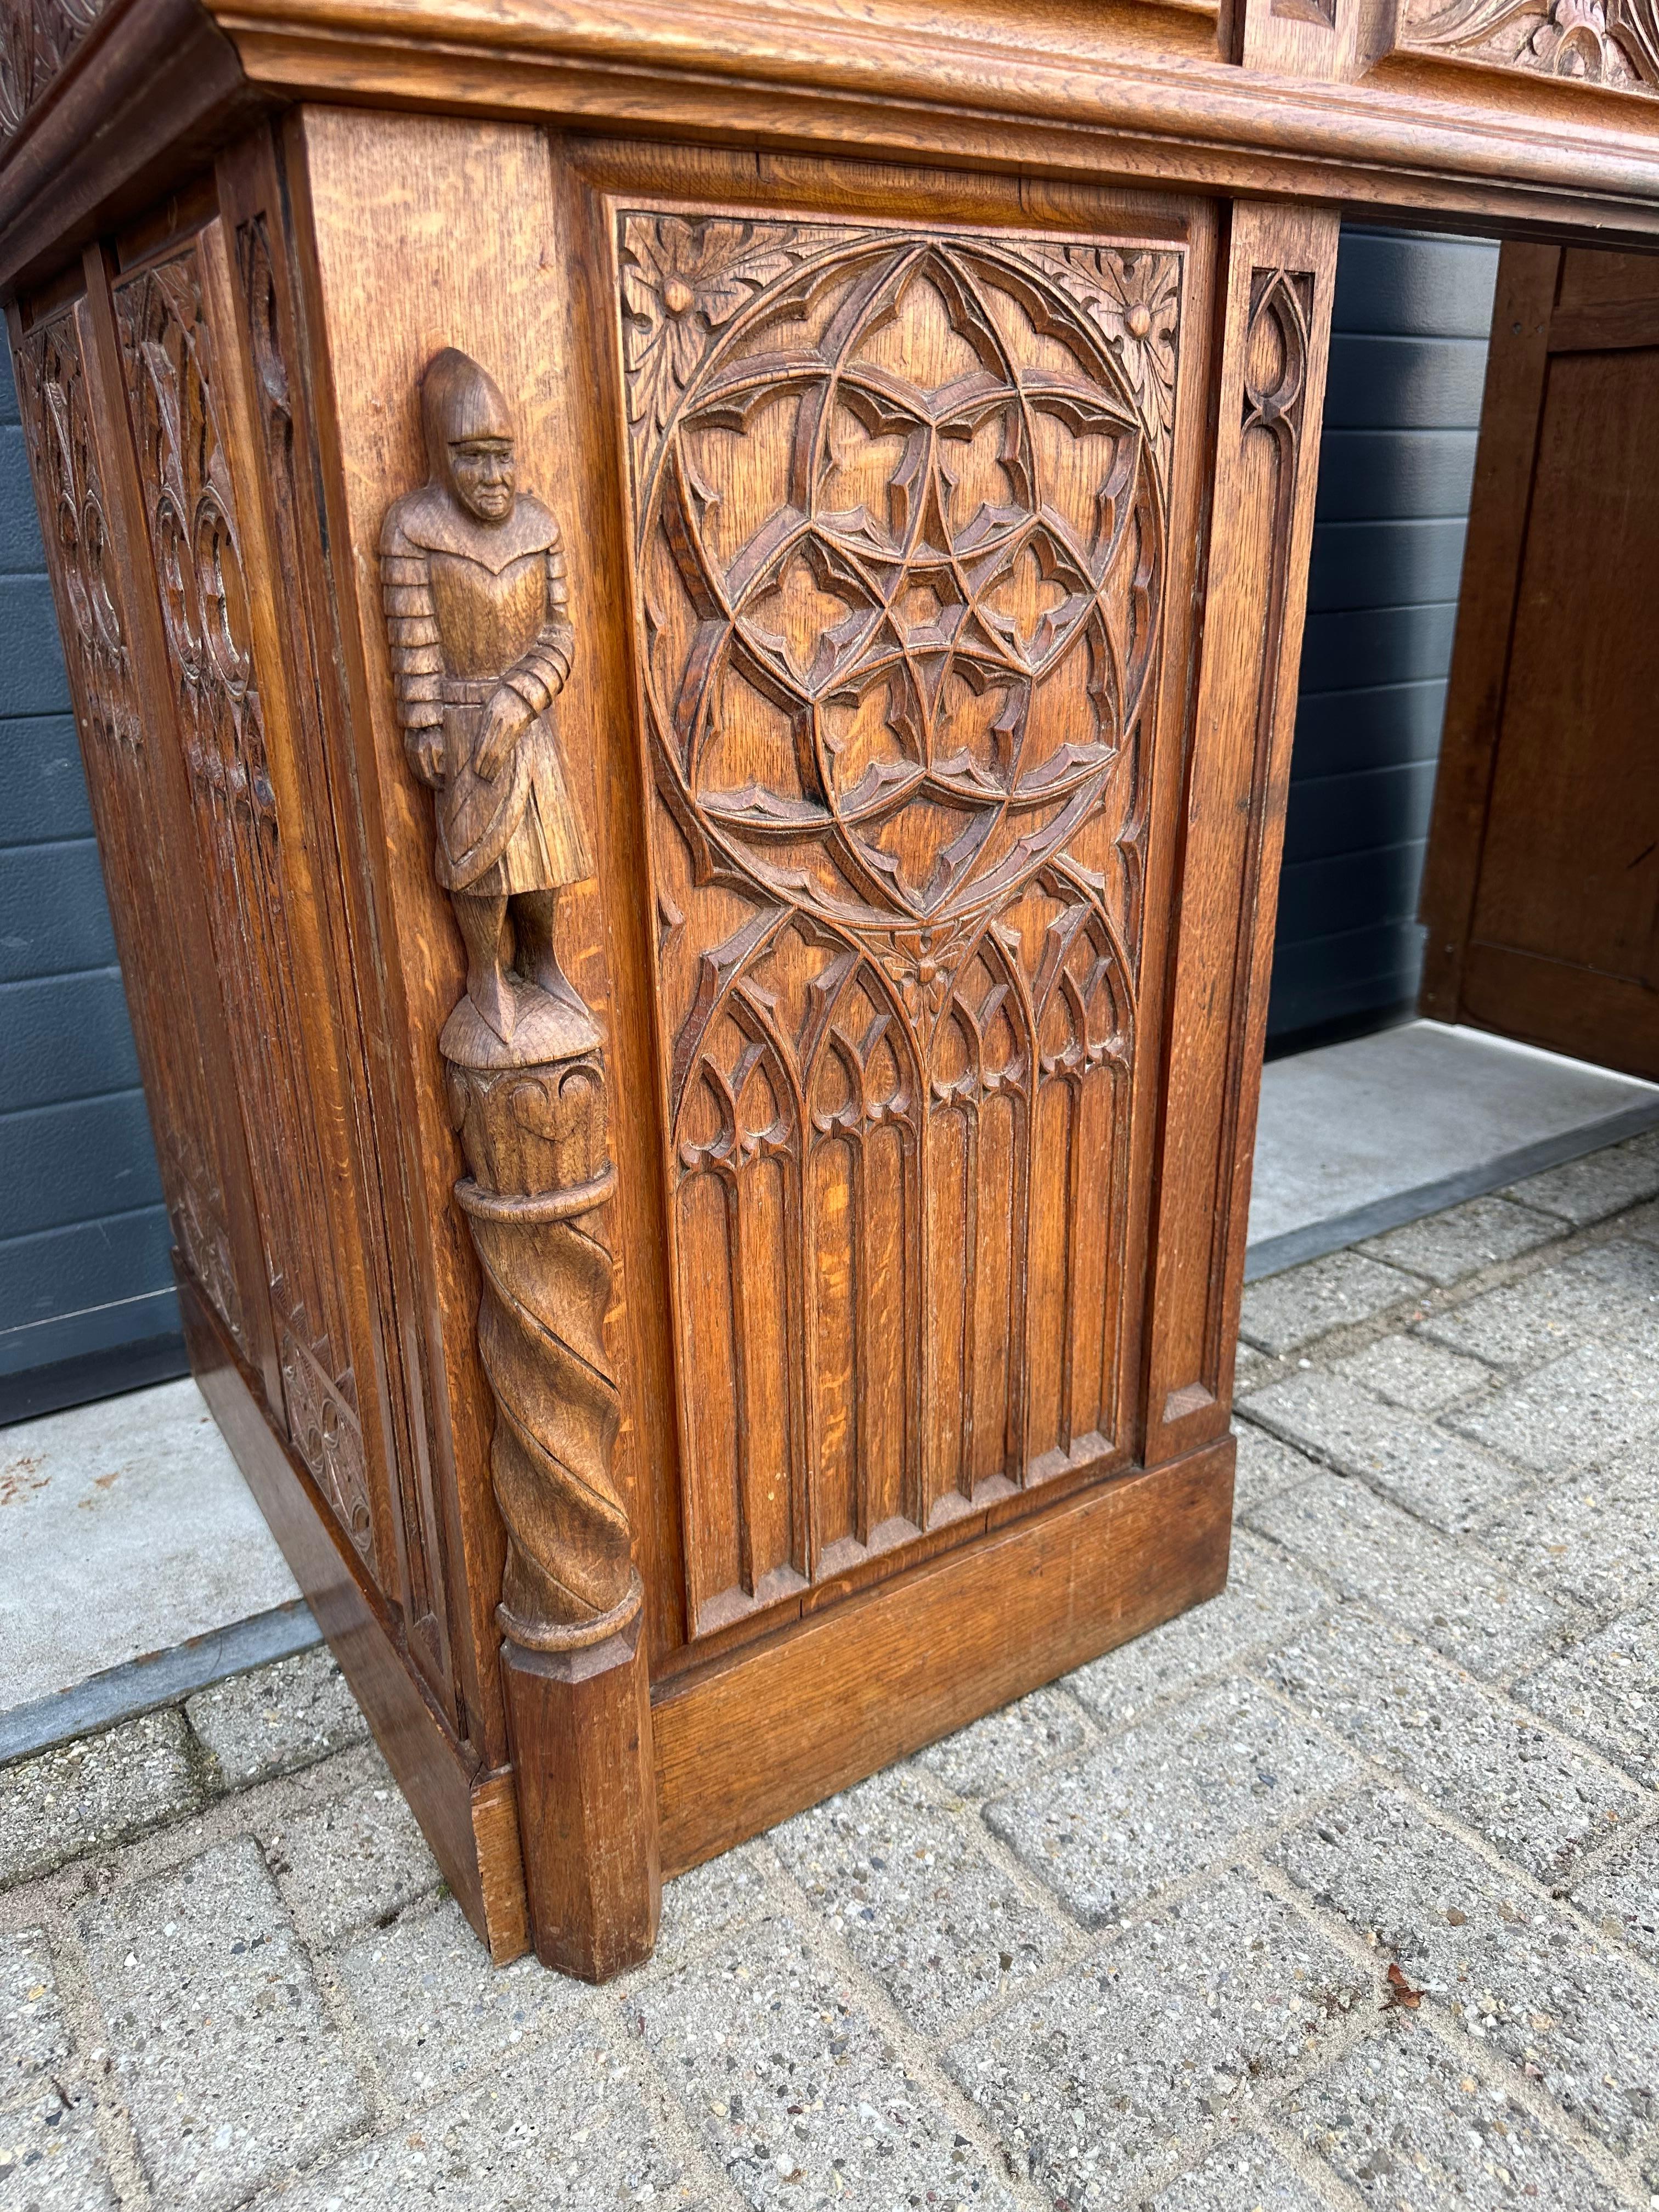 Wood Gothic Revival Oak Fireplace Mantel with Carved Church Window Panels & Guards For Sale